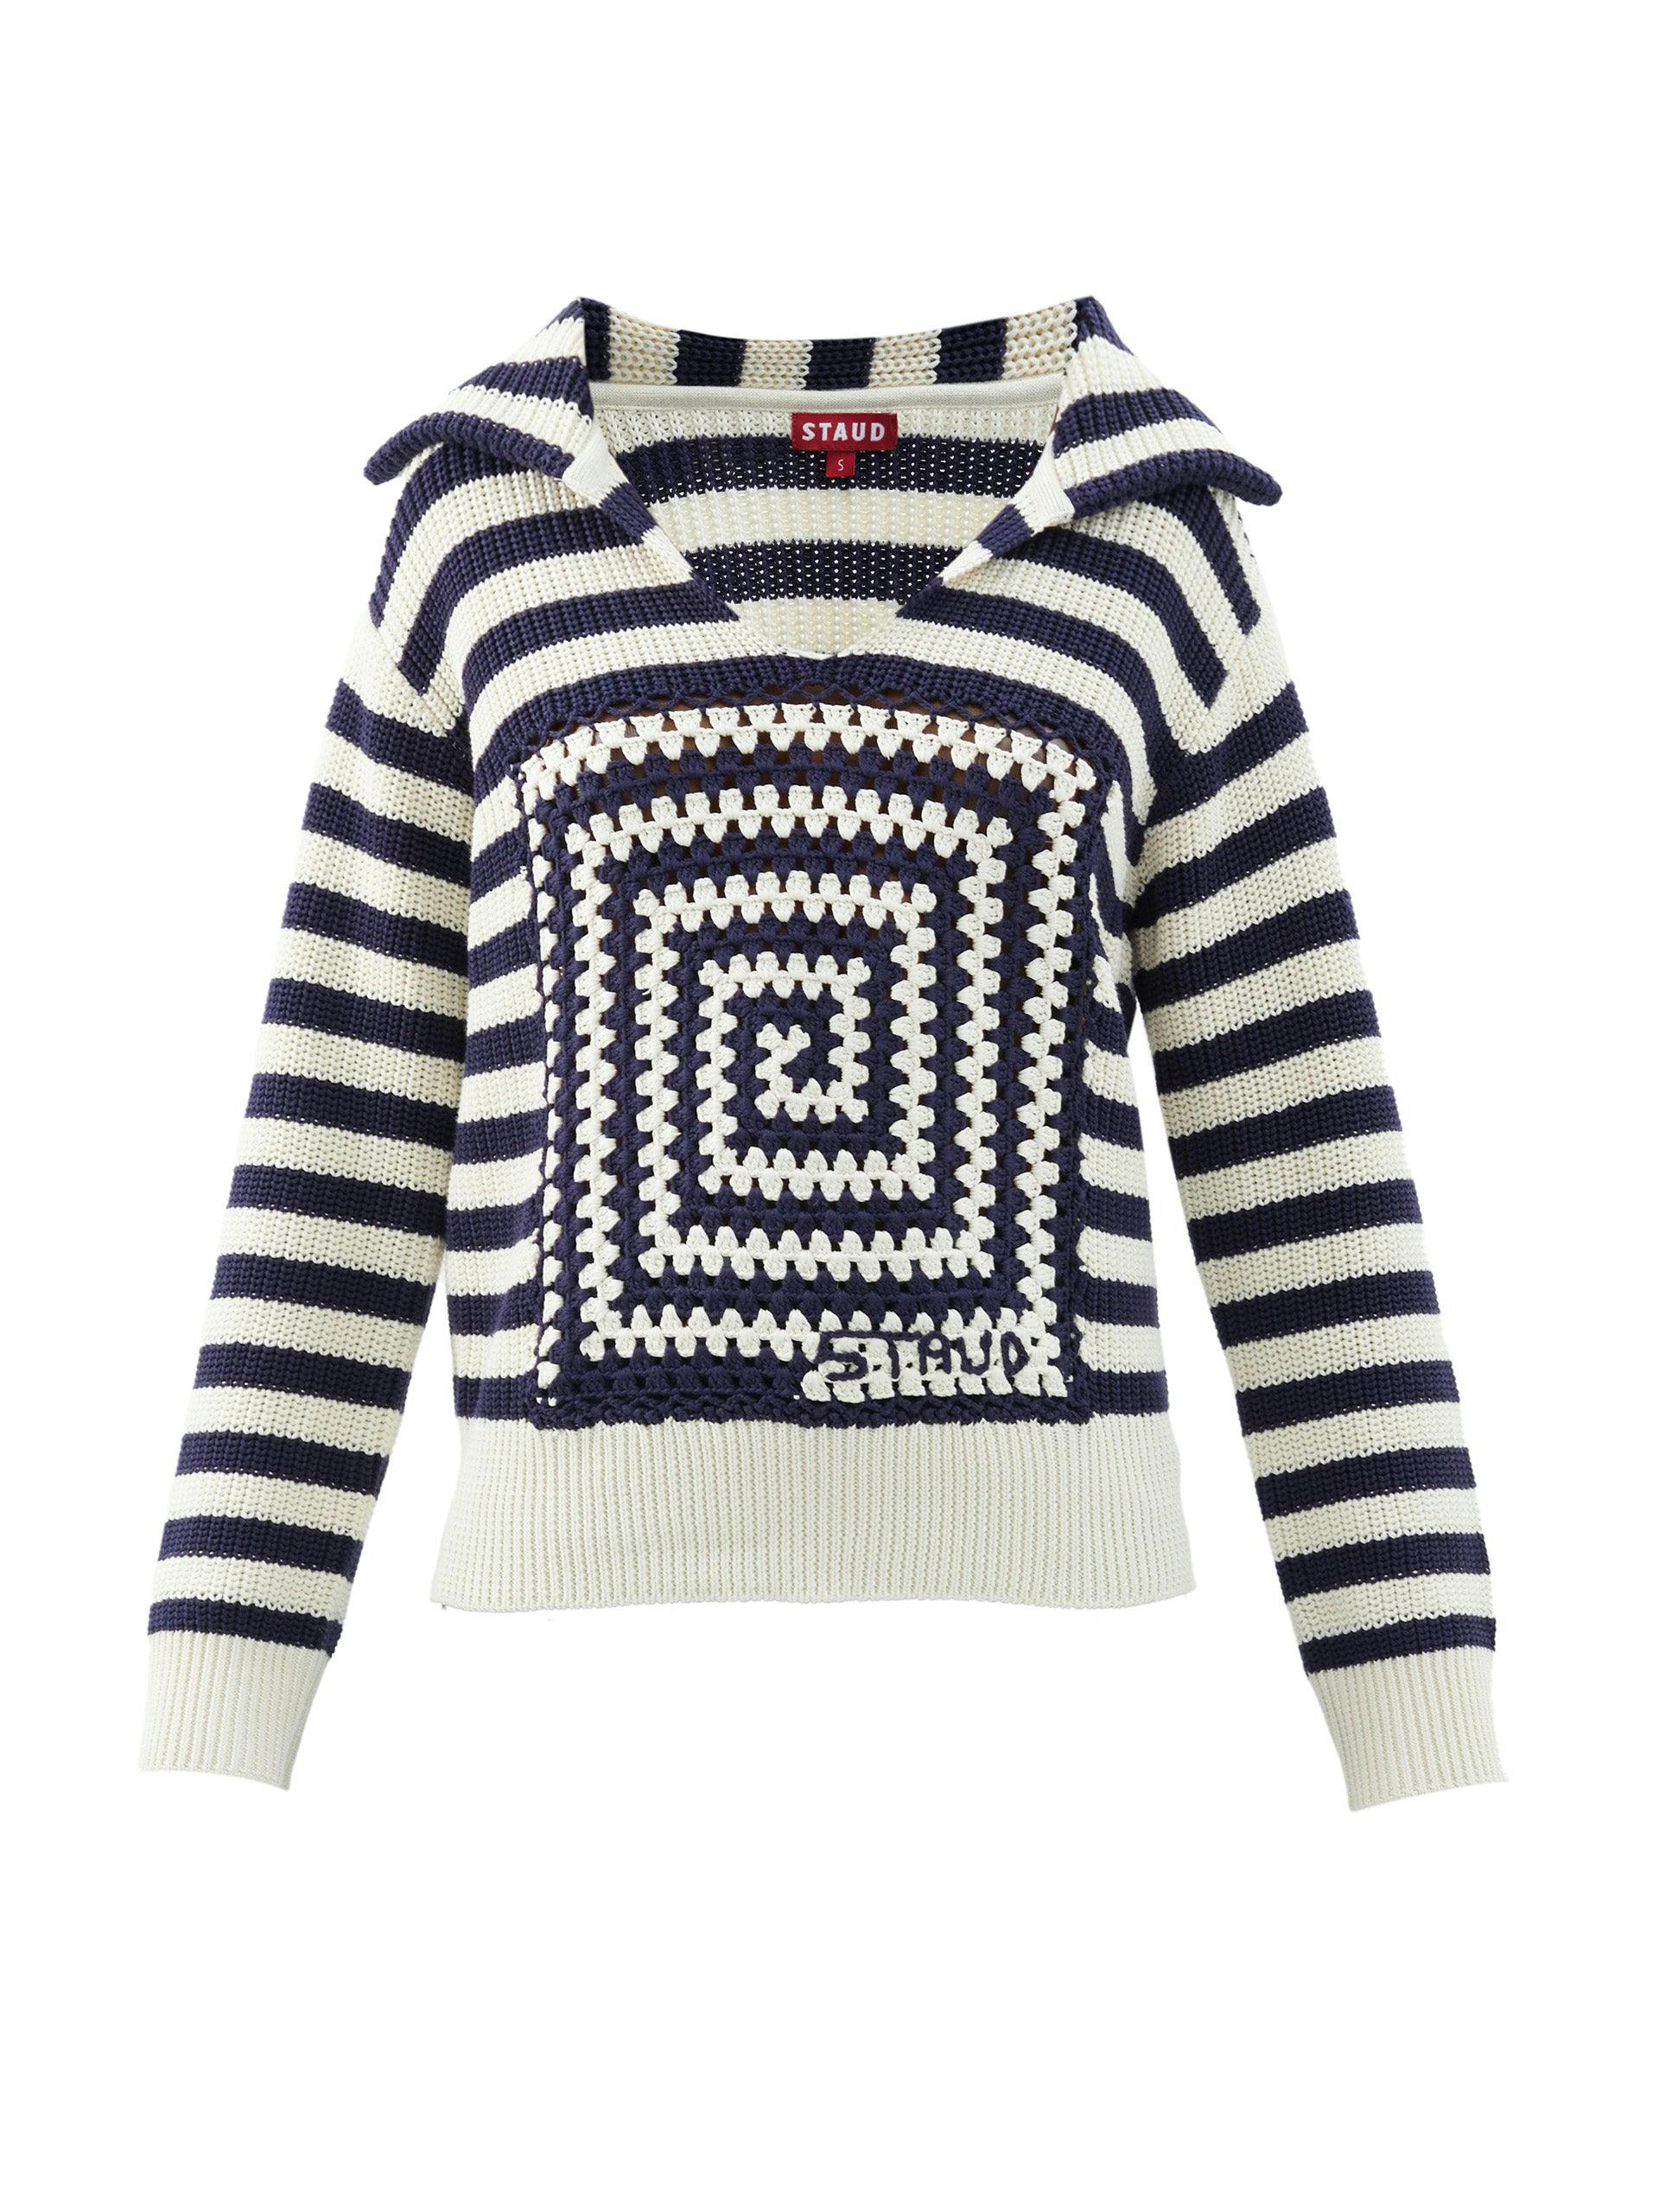 Alloy striped crocheted cotton sweater